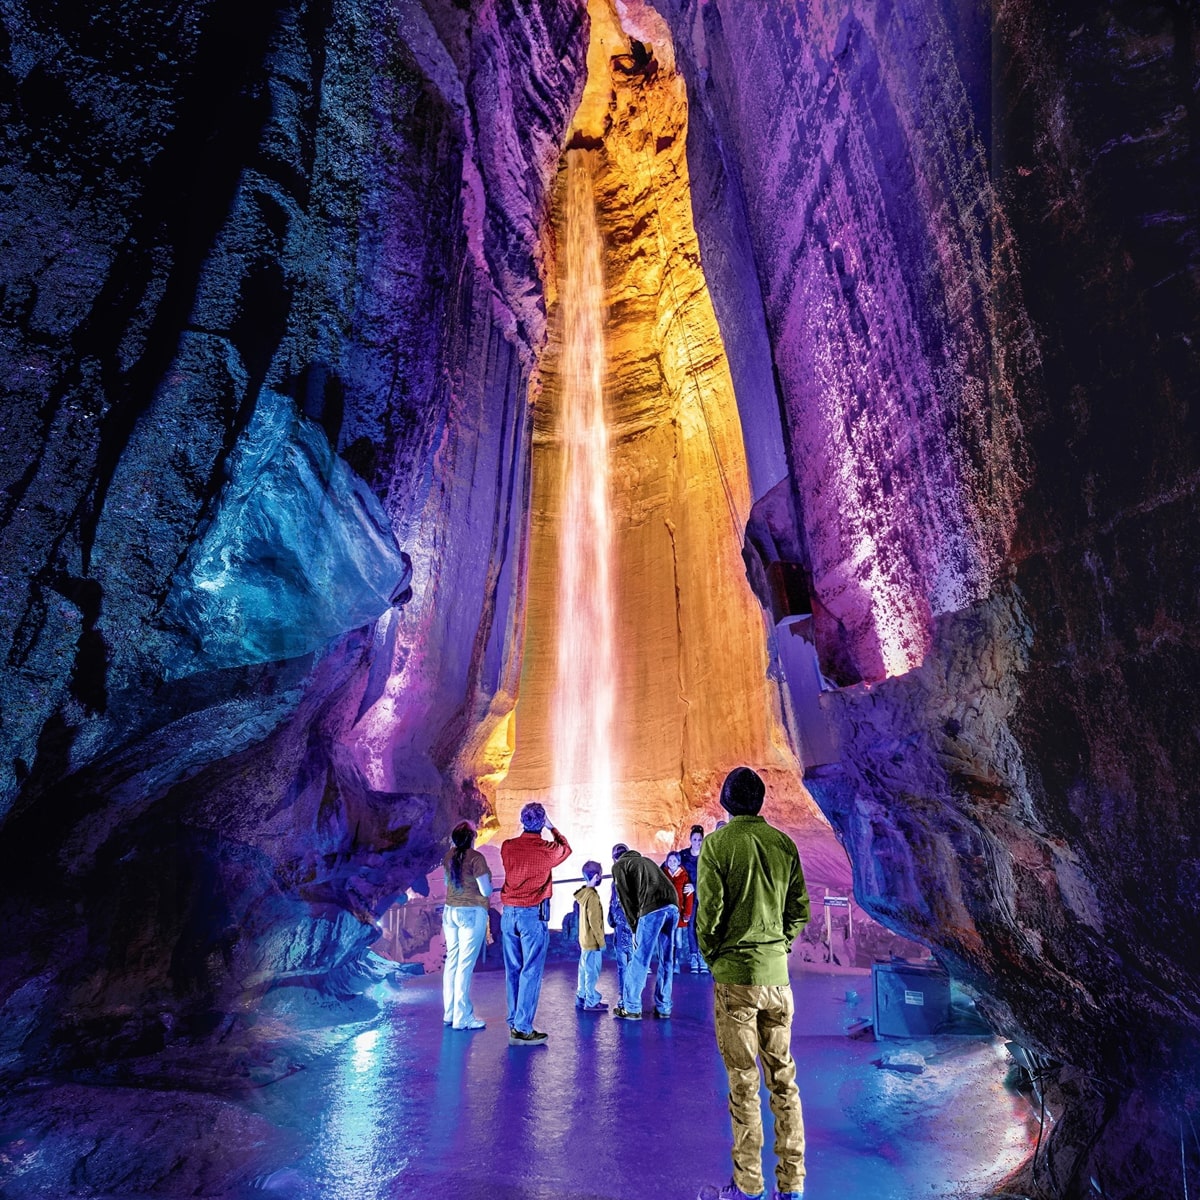 Colorful Ruby Falls with people gazing up